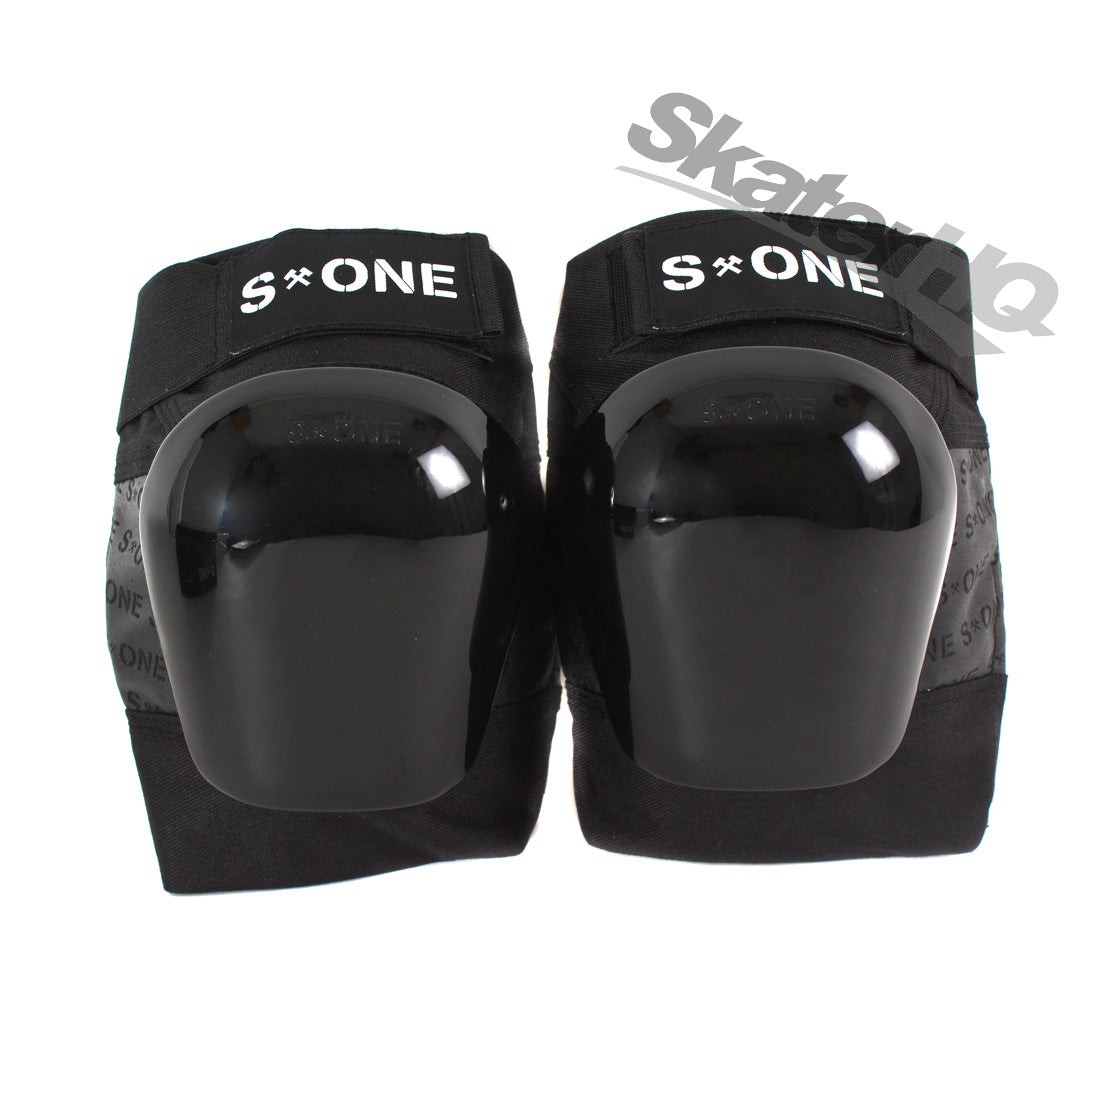 S-One Pro Knee Pads Black - Small Protective Gear